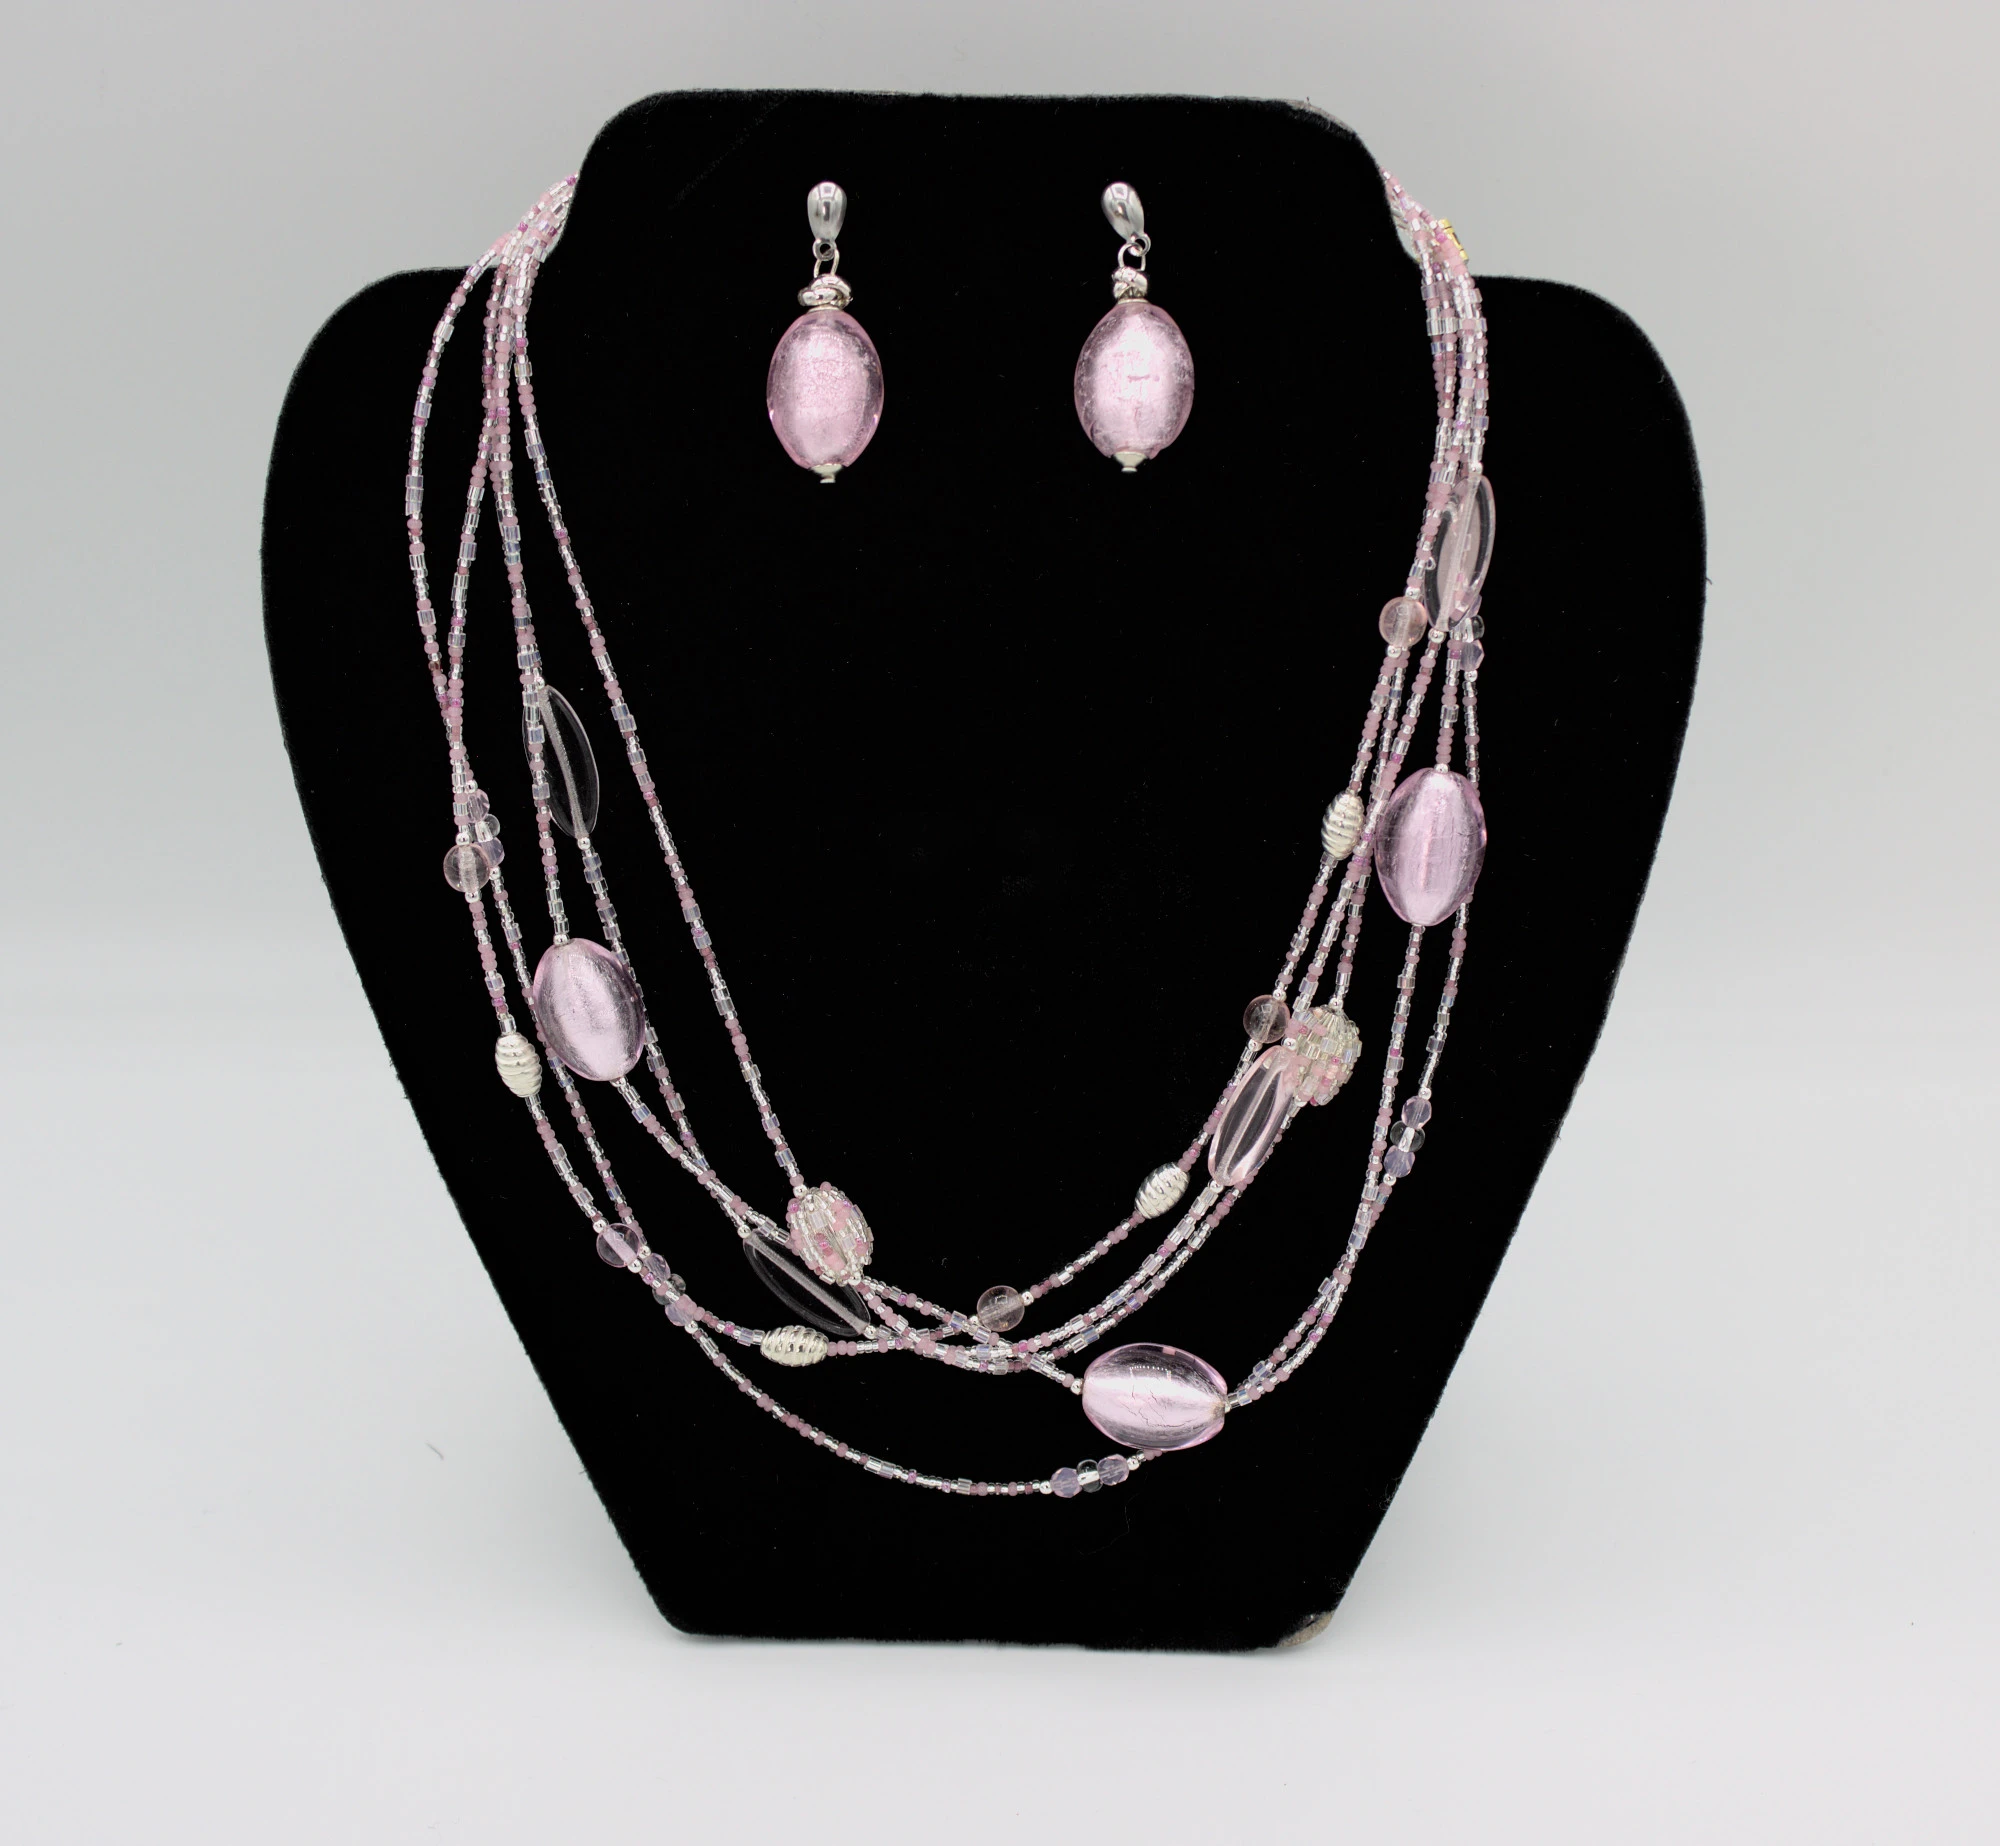 Lustrous pink multi strand graduated beaded necklace with matching earrings